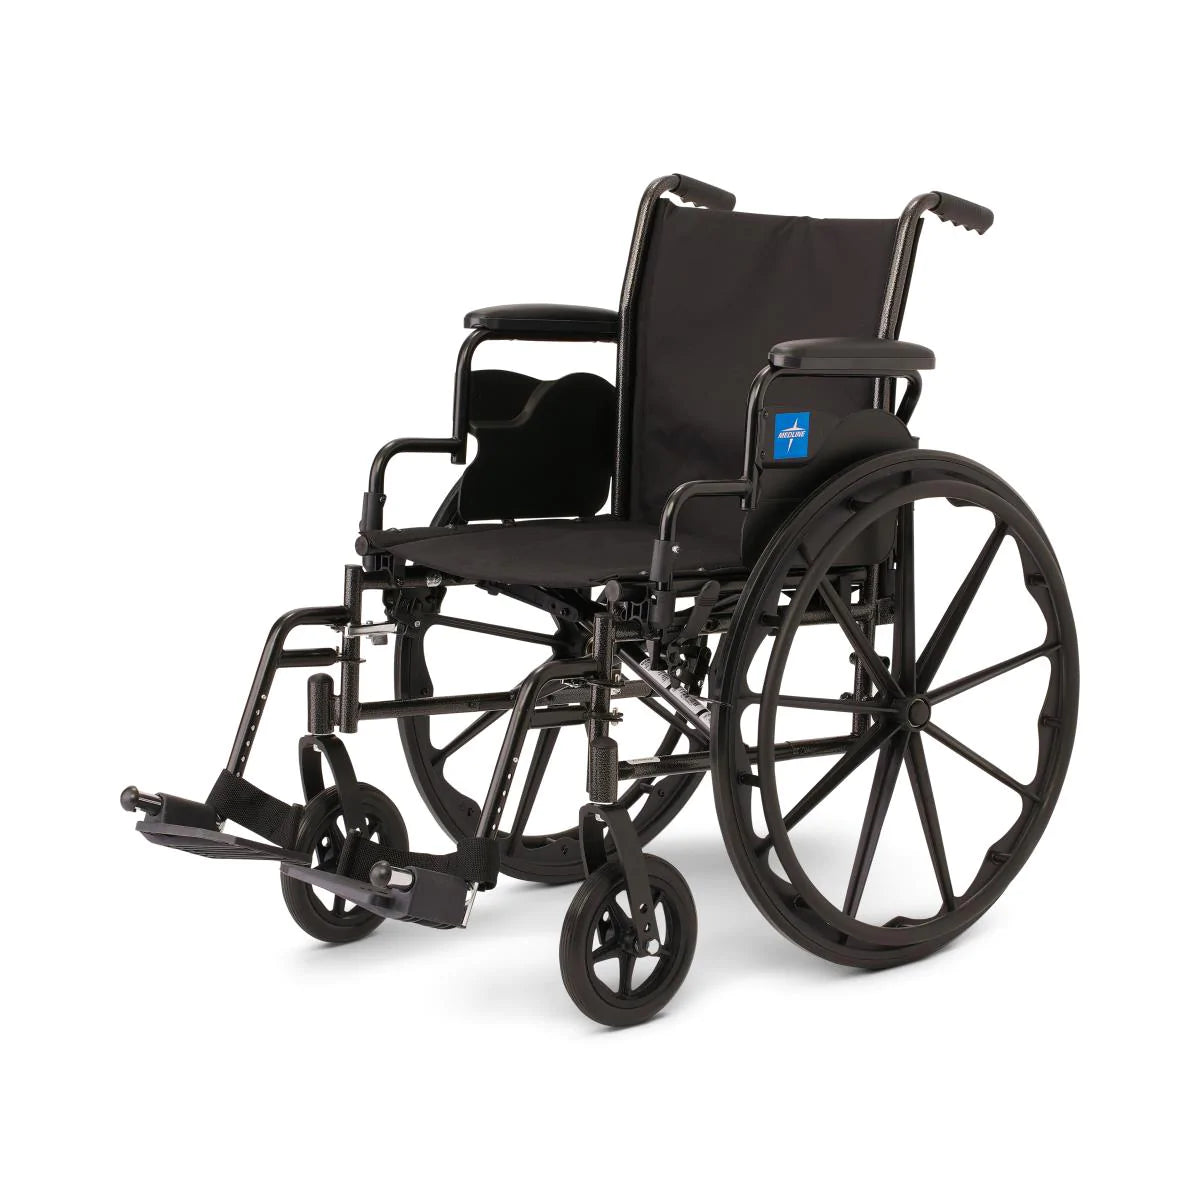 RENTAL Wheelchair (CALL FOR PRICE*)